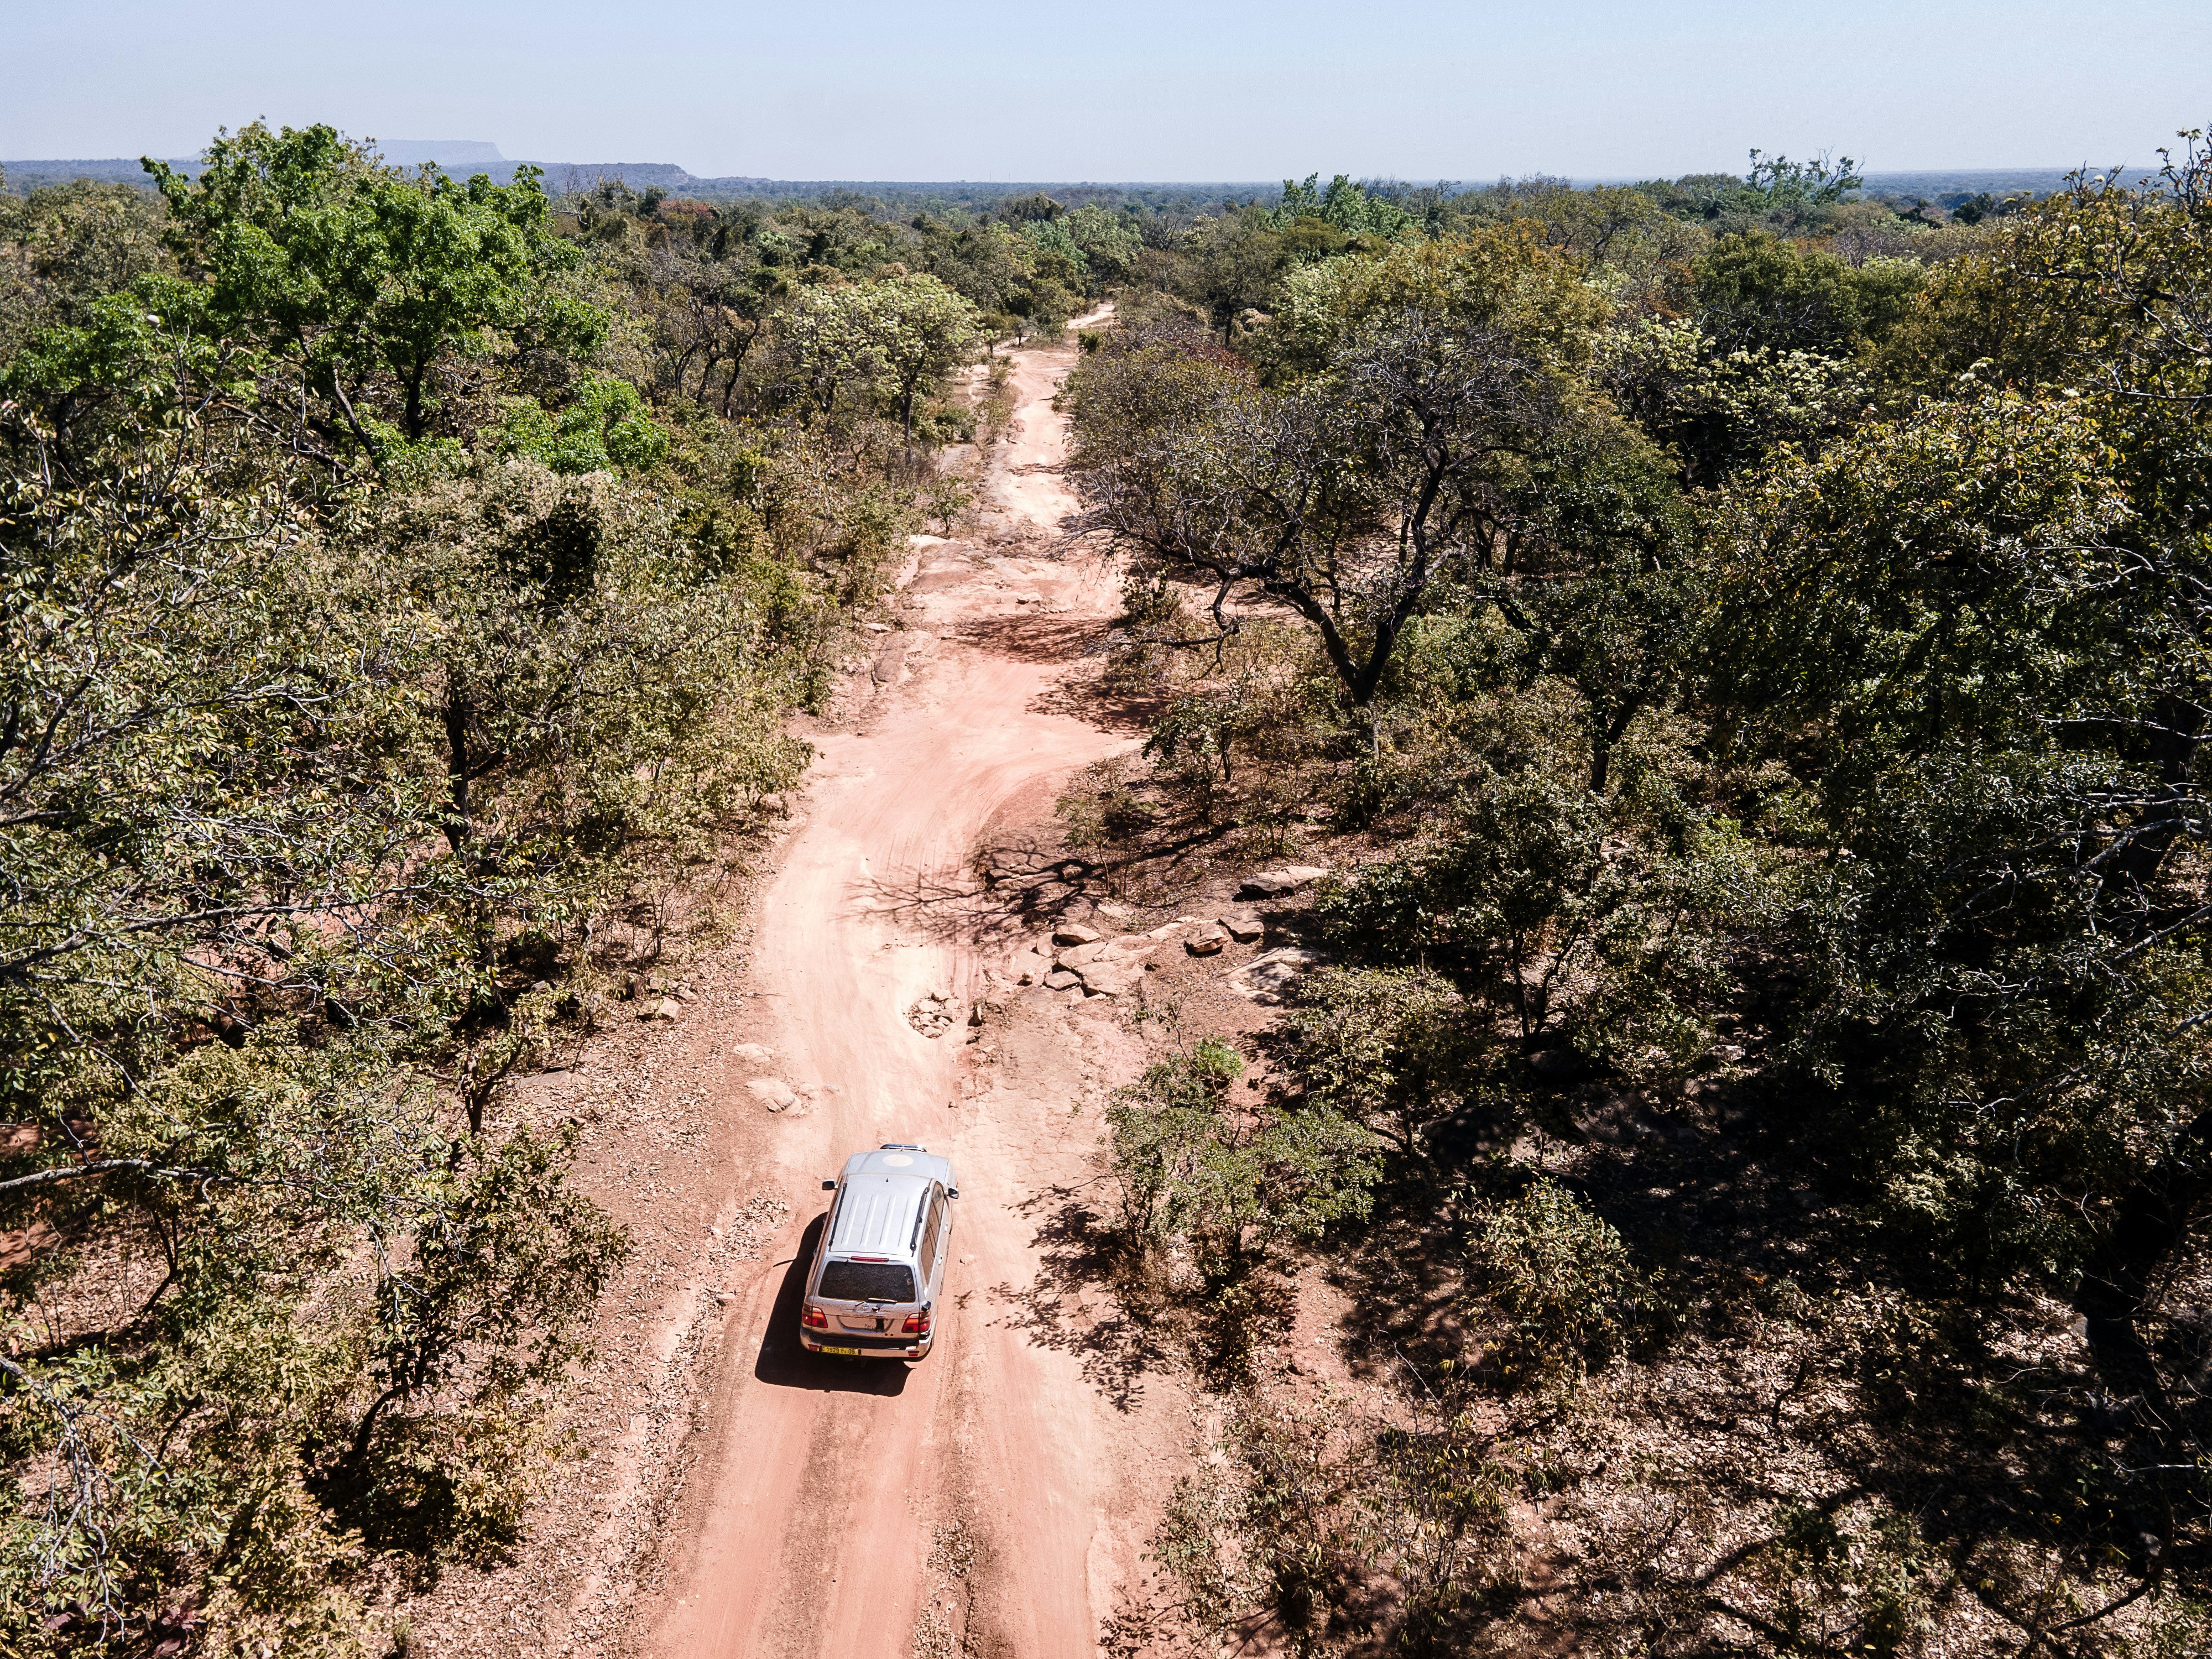 A jeep drives down a red dusty road between the trees. 